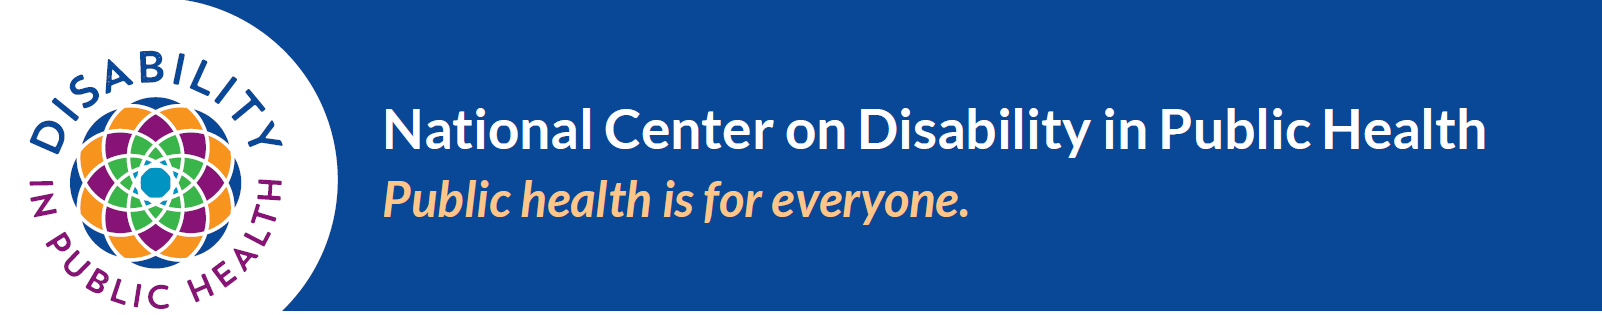 National Center on Disability in Public Health